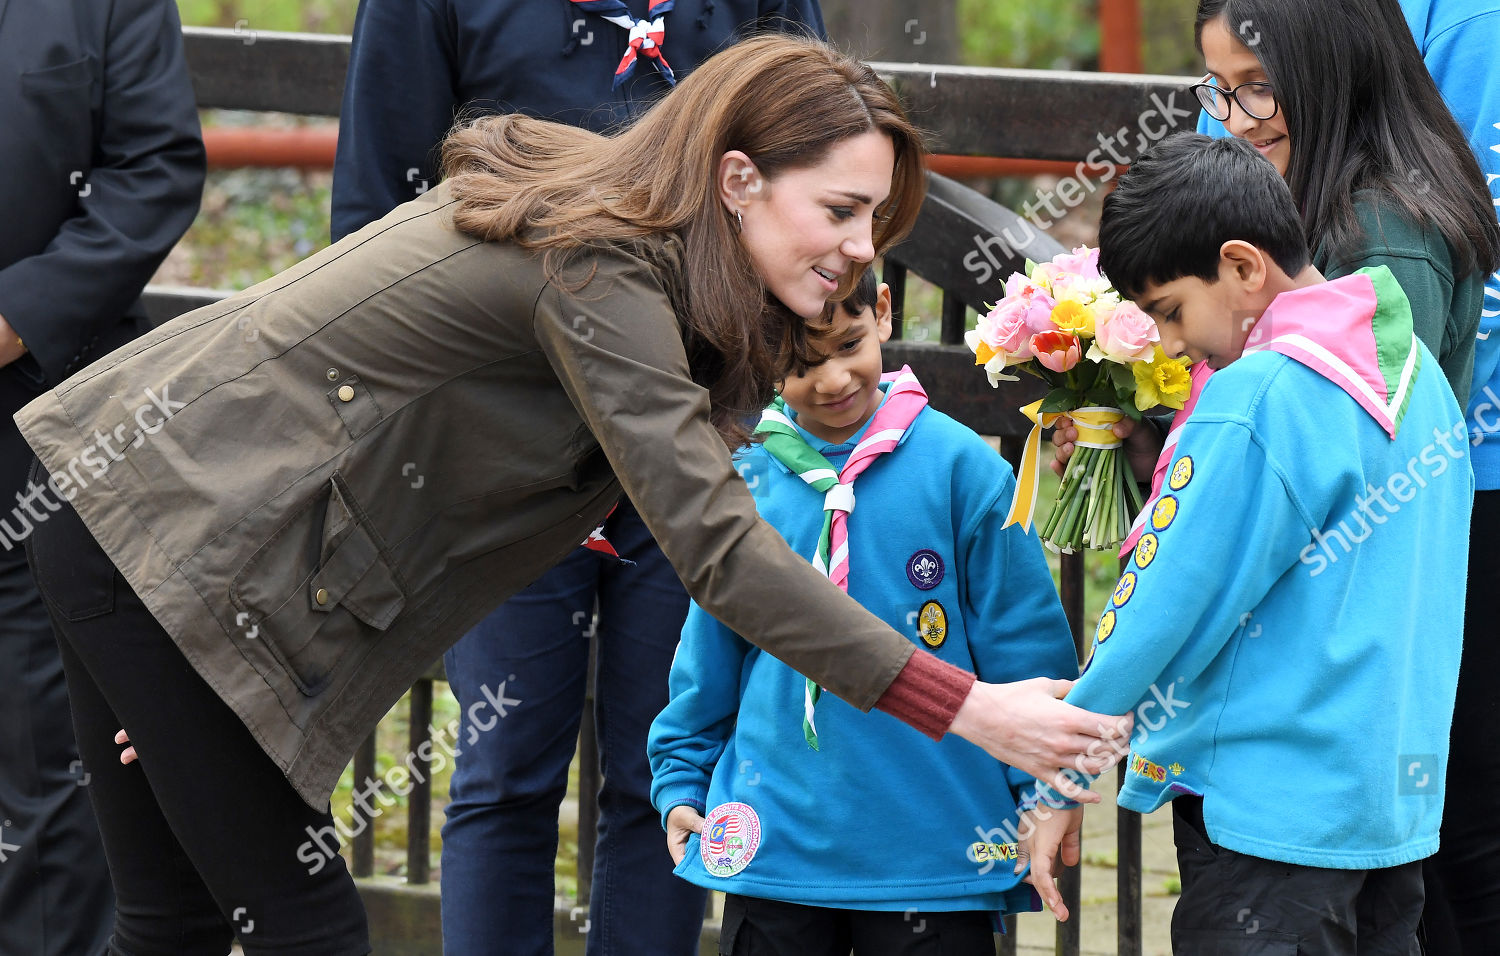 catherine-duchess-of-cambridge-visit-to-the-scouts-gilwell-park-essex-uk-shutterstock-editorial-10179979j.jpg